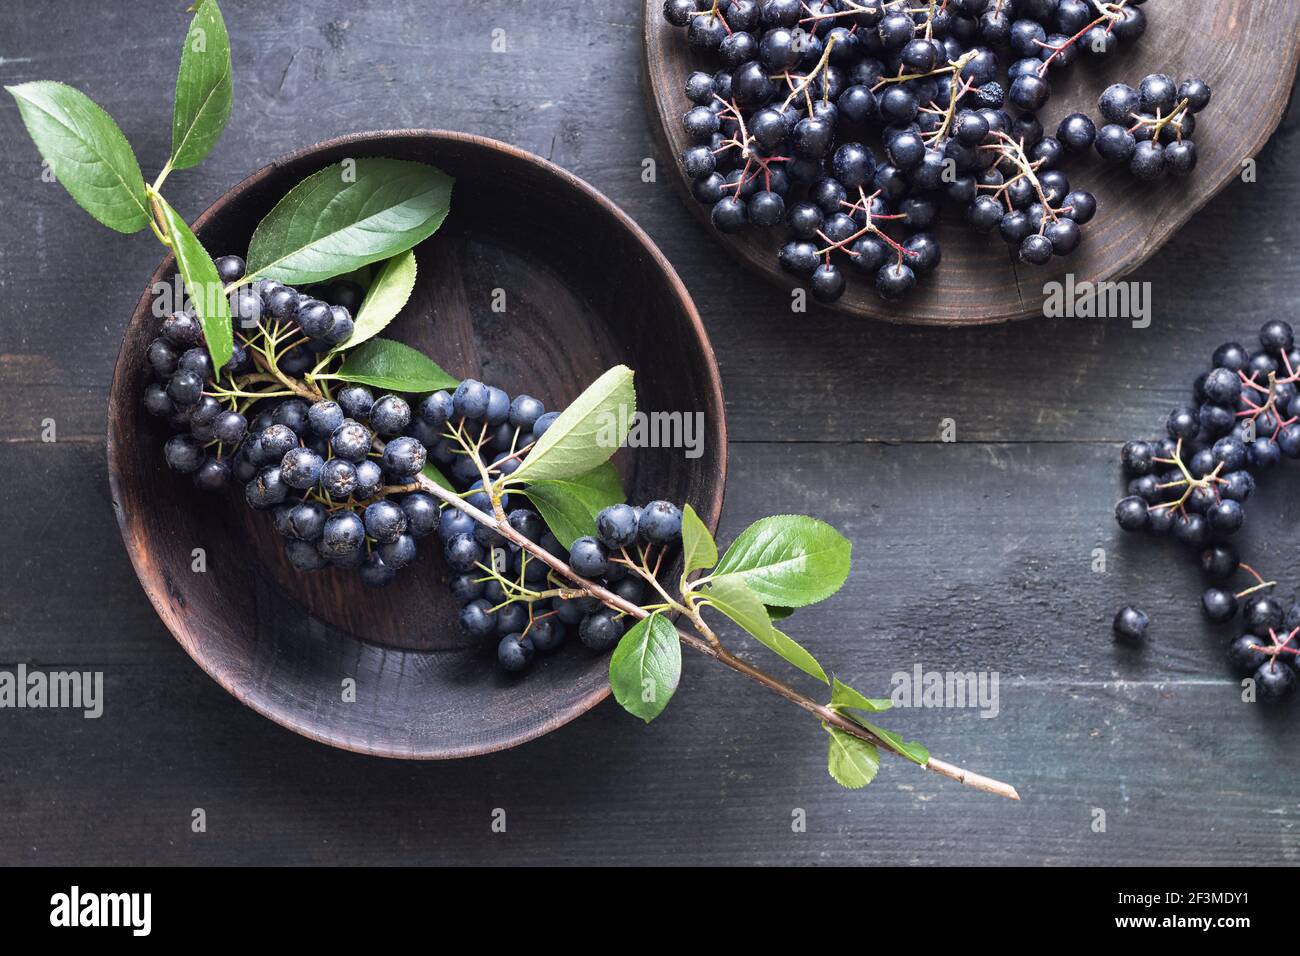 Freshly picked homegrown aronia berries on wooden table Stock Photo